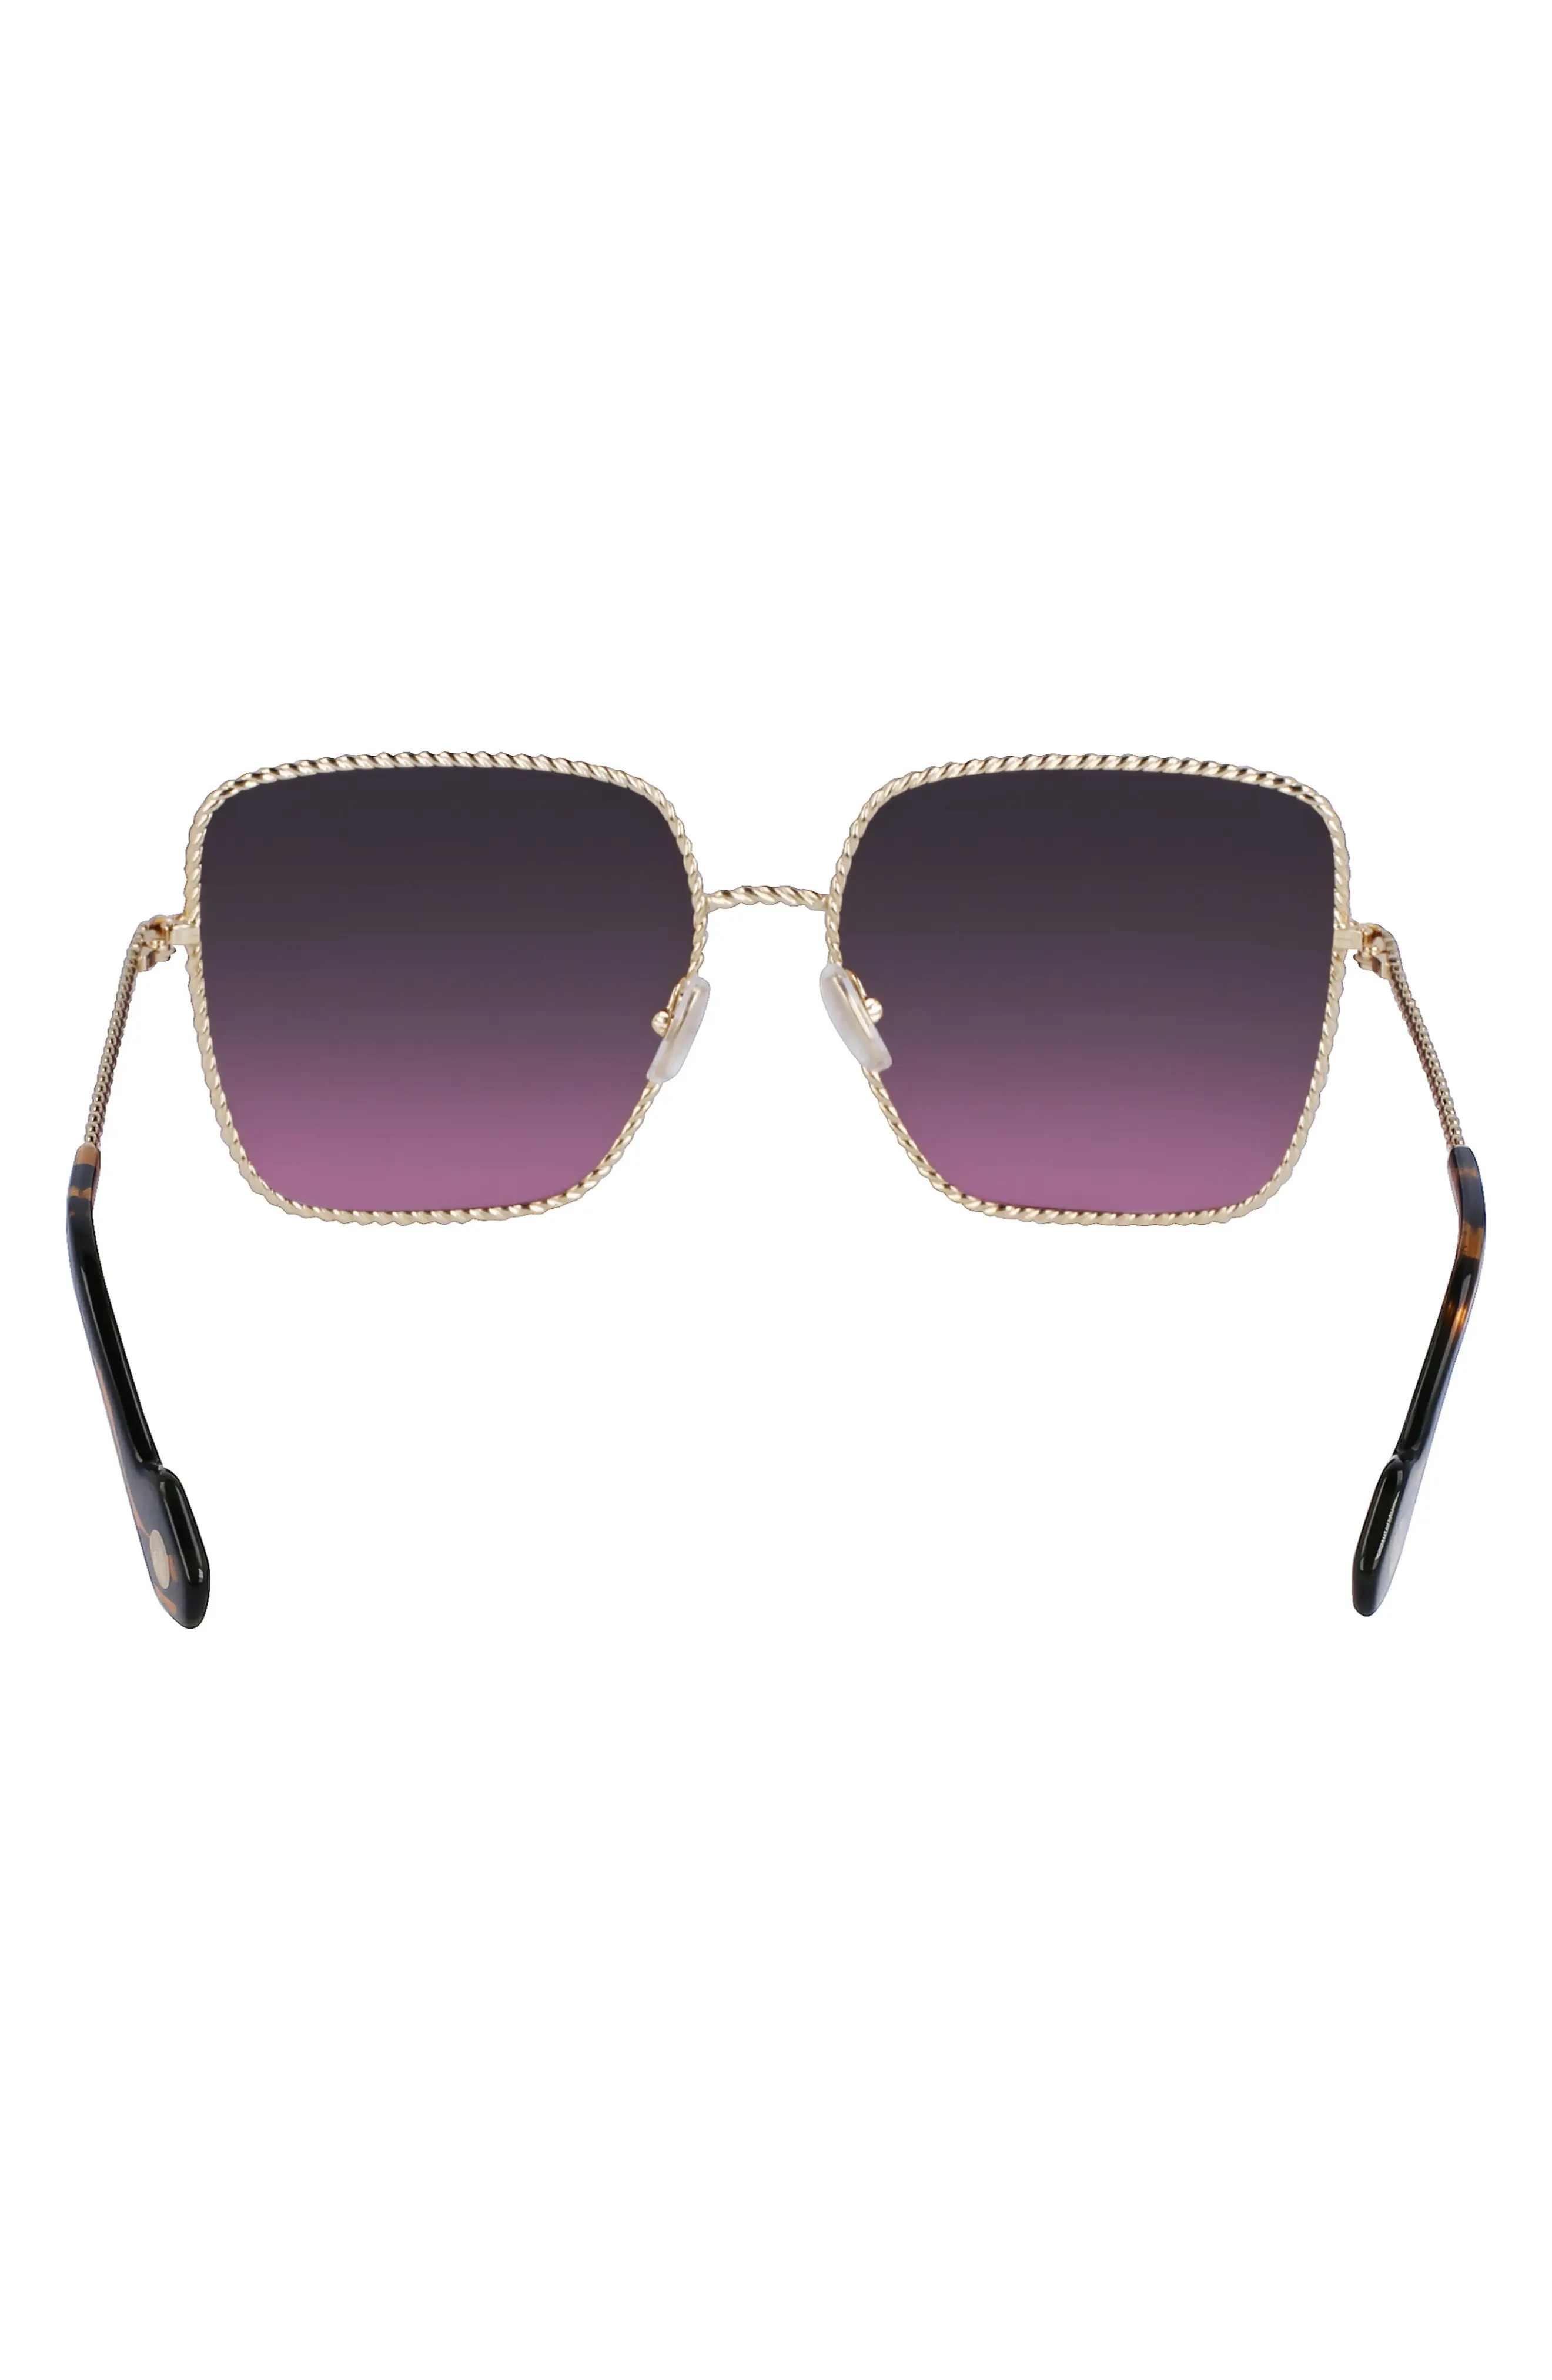 Babe 59mm Gradient Square Sunglasses in Gold/Gradient Grey Rose - 4